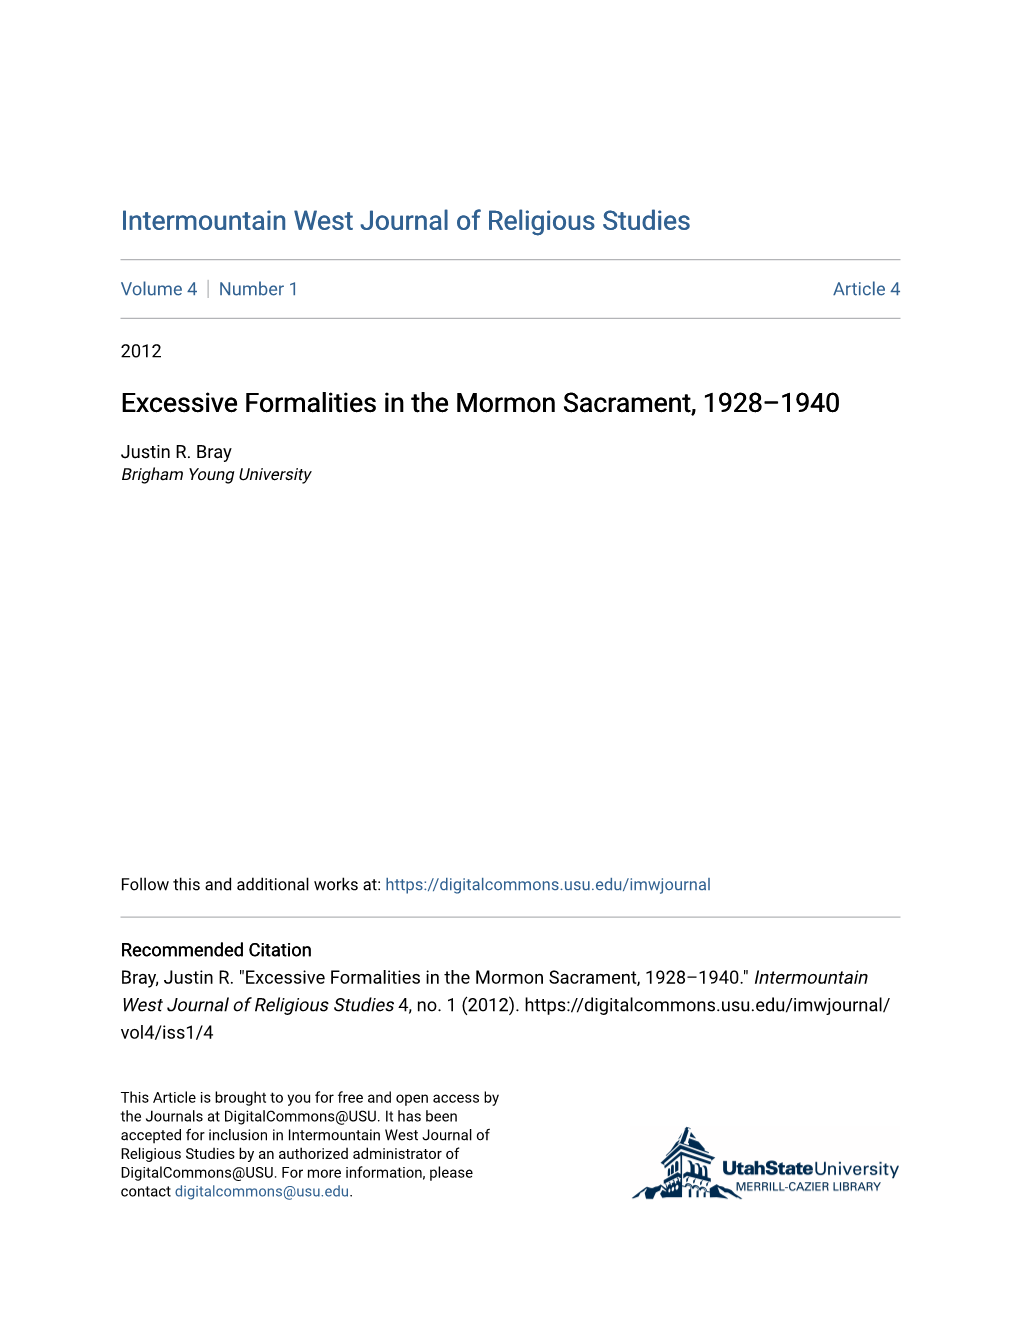 Excessive Formalities in the Mormon Sacrament, 1928–1940